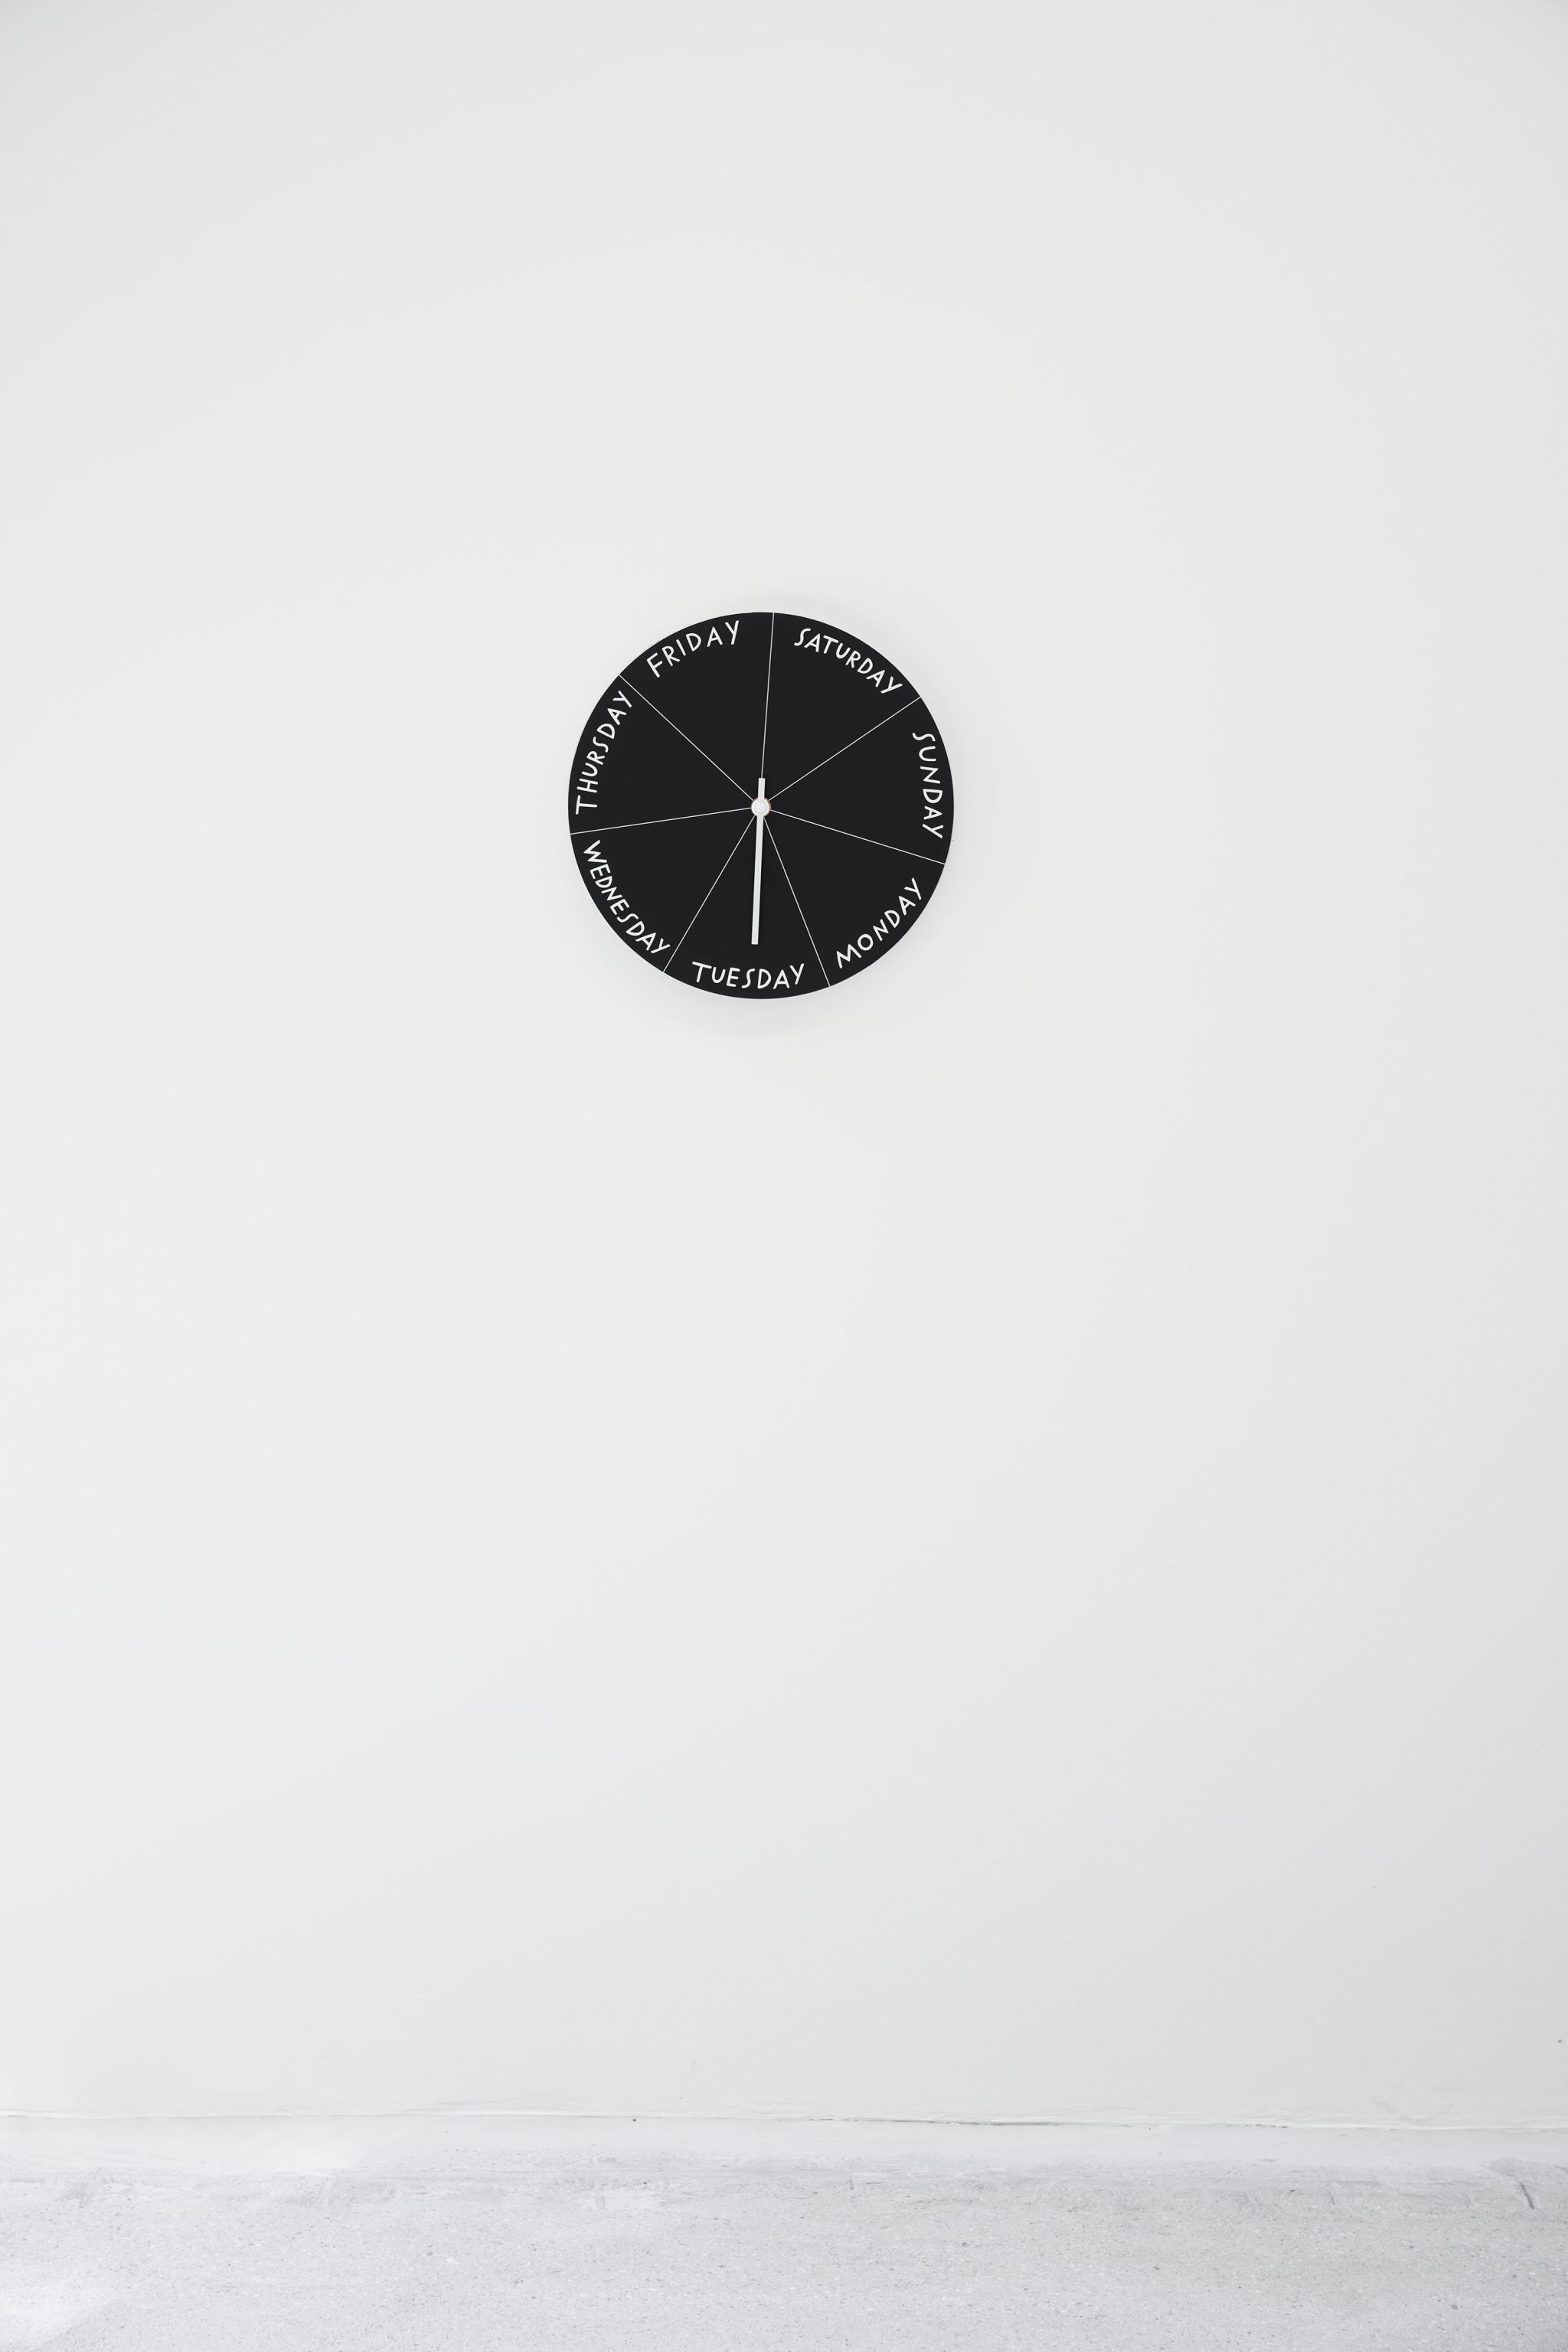 Finnegan Shannon, Have you ever fallen in love with a clock? – Saturday, 2021, Day Clock mechanism, DiBond, clock hand, paint, ø 34 ⁠cm, Image description: A black Day Clock is hanging on a wall, the white clock hand is pointing to Tuesday. On the 1 o’clock position, it says “Saturday”. The other days of the week follow around the clock.